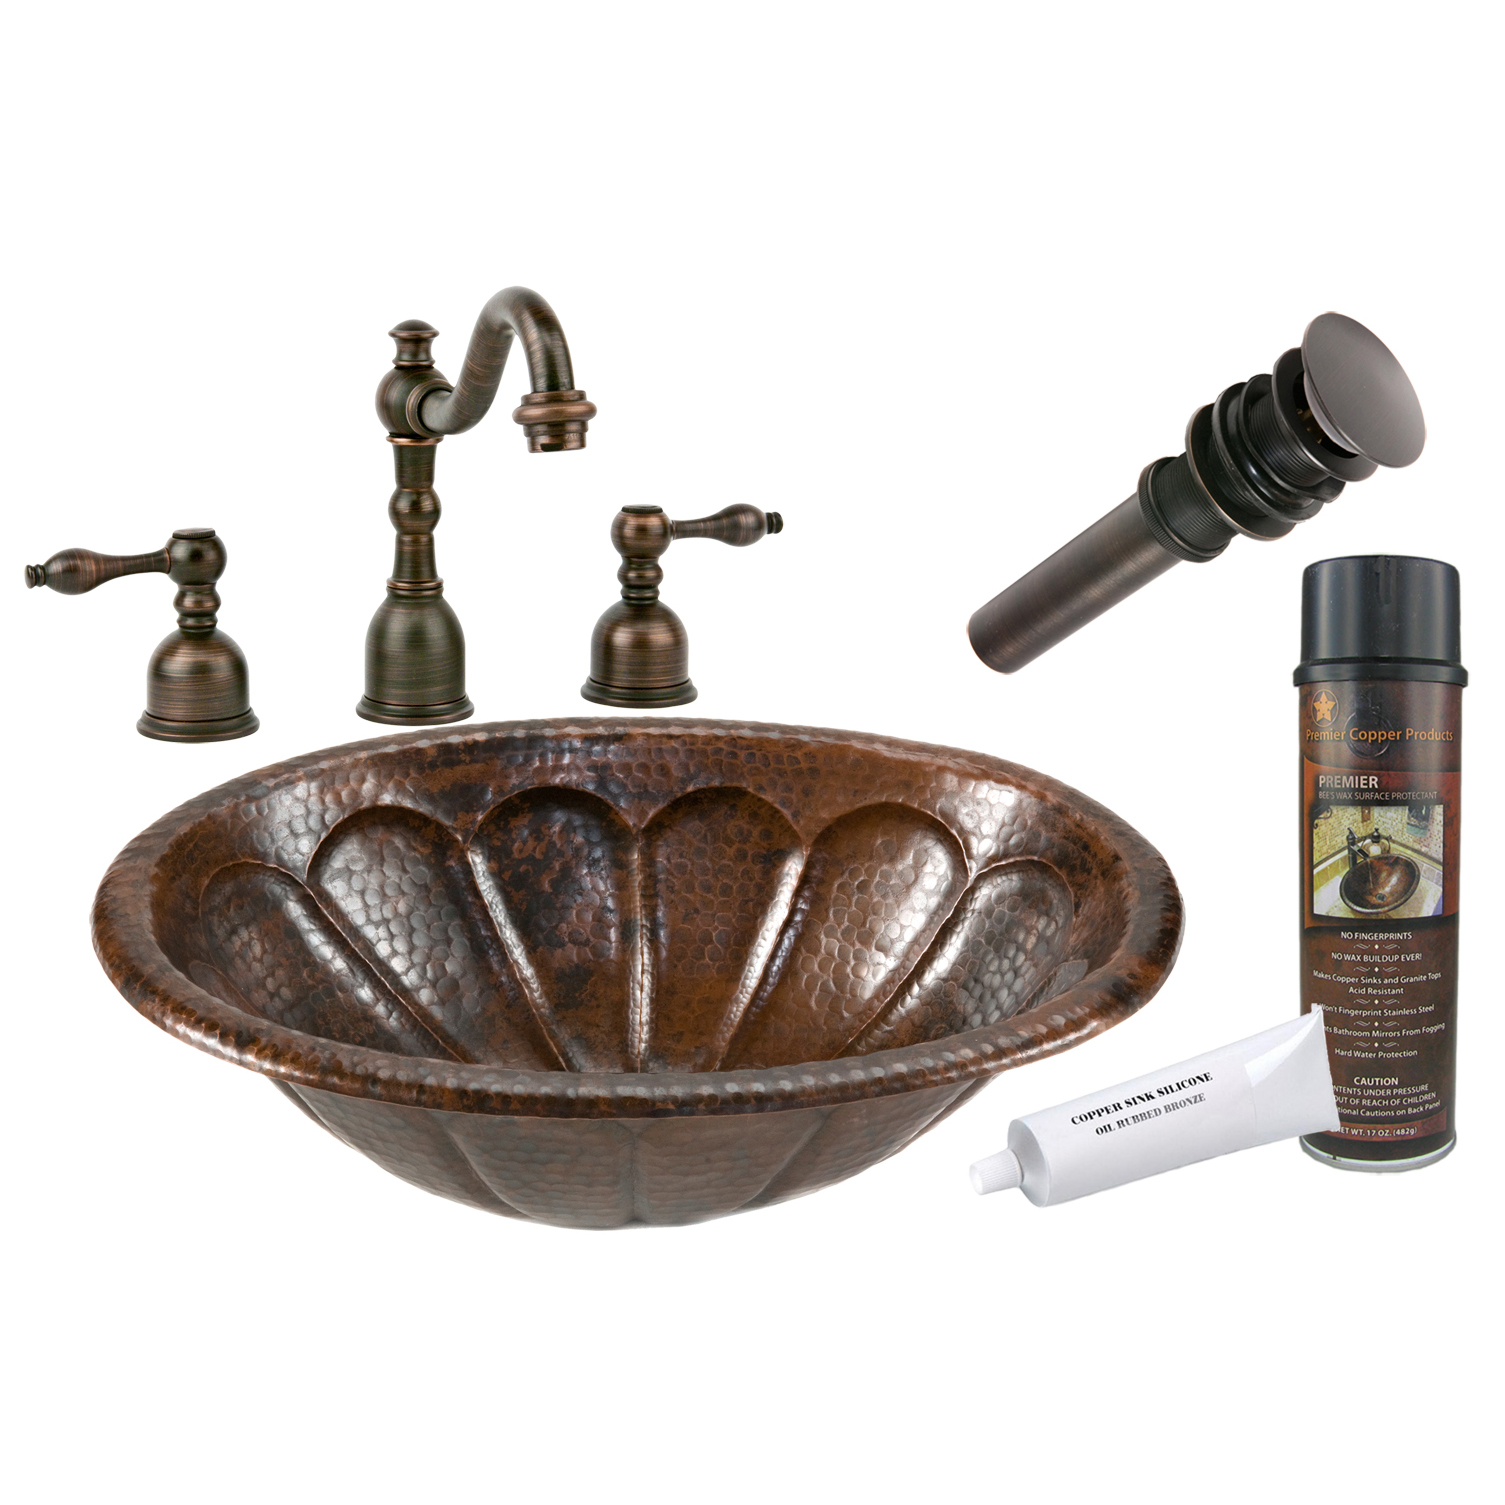 Oval Sunburst Self Rimming Hammered Coopper Sink, Faucet And Accessories Package, Oil Rubbed Bronze